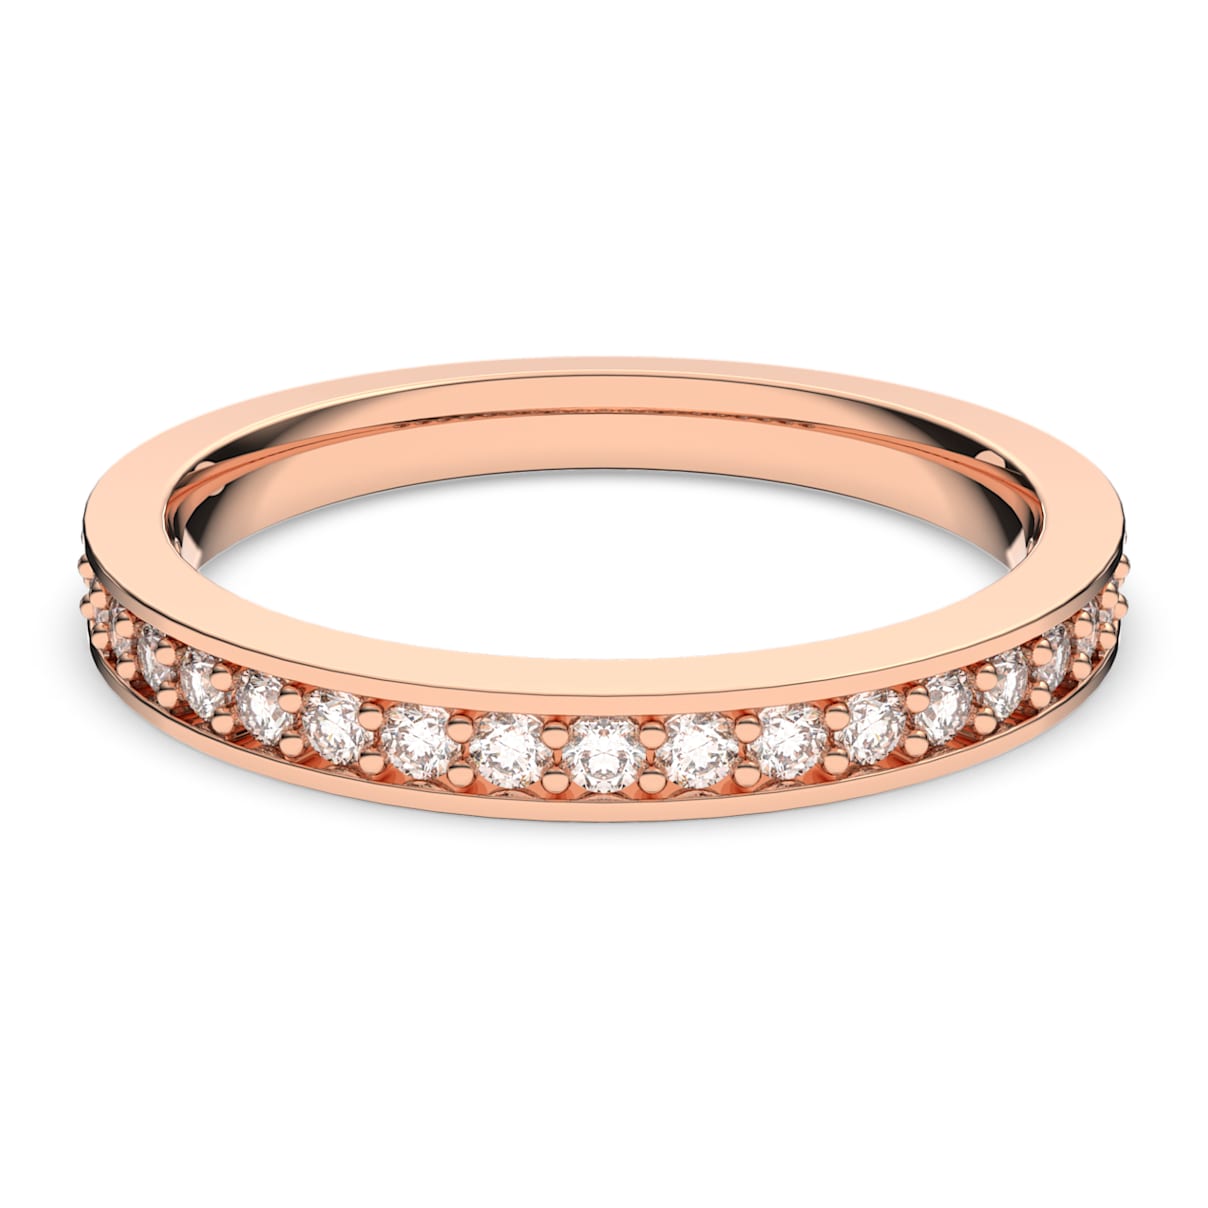 Rare Ring, White, Rose-gold tone plated